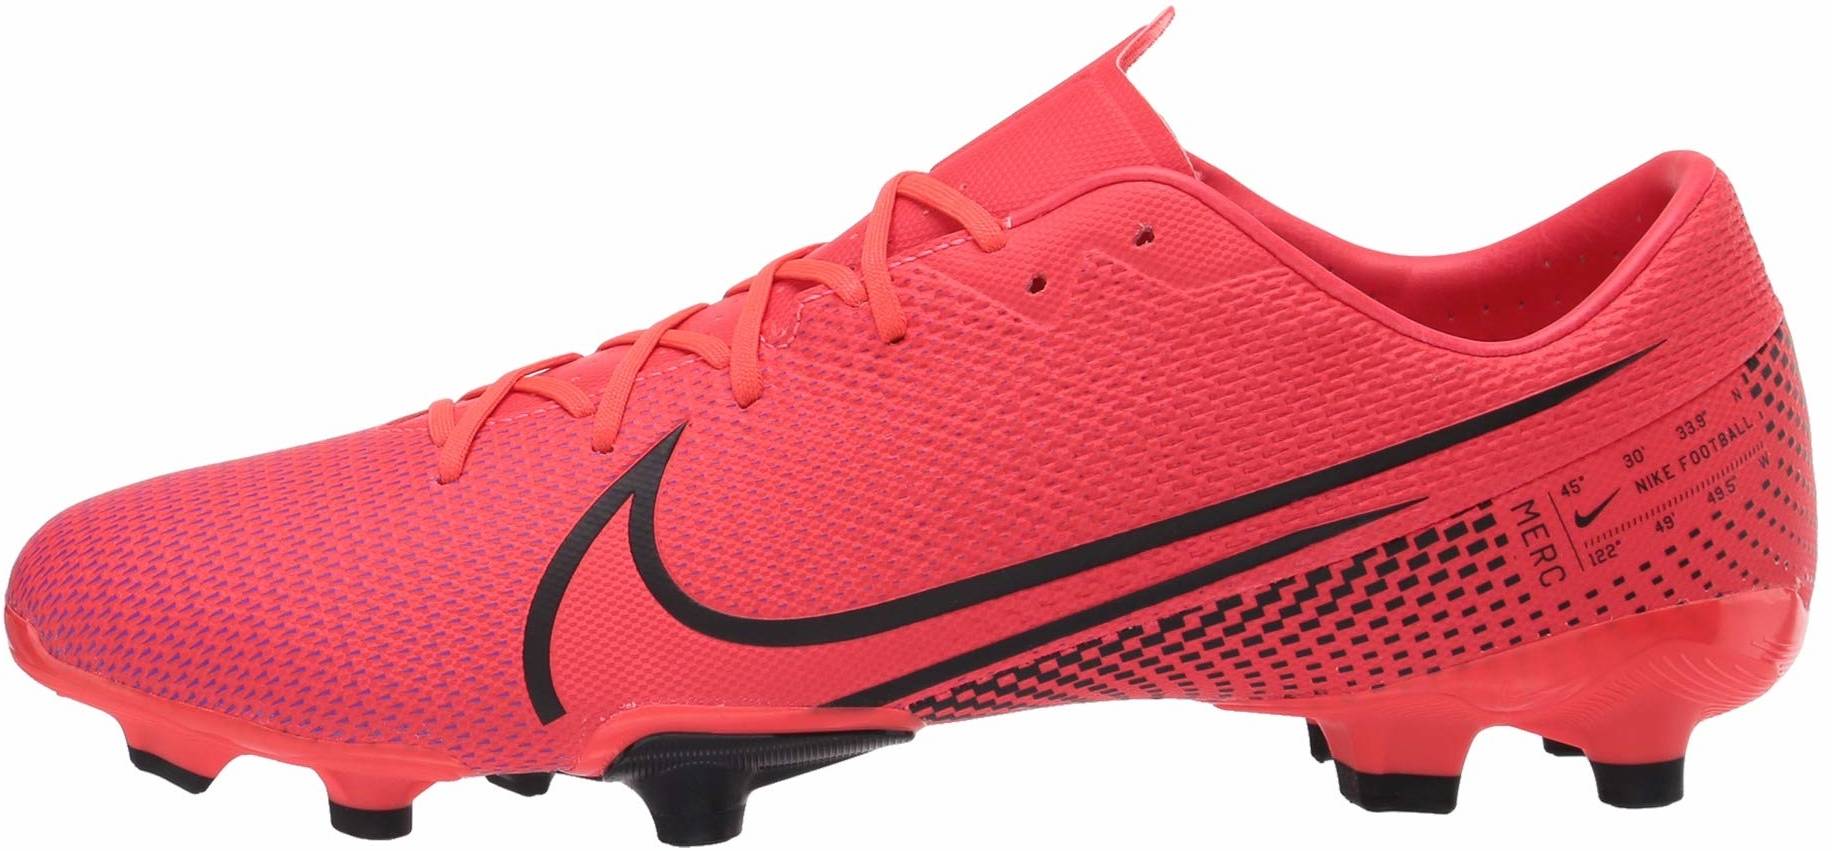 red soccer cleats womens